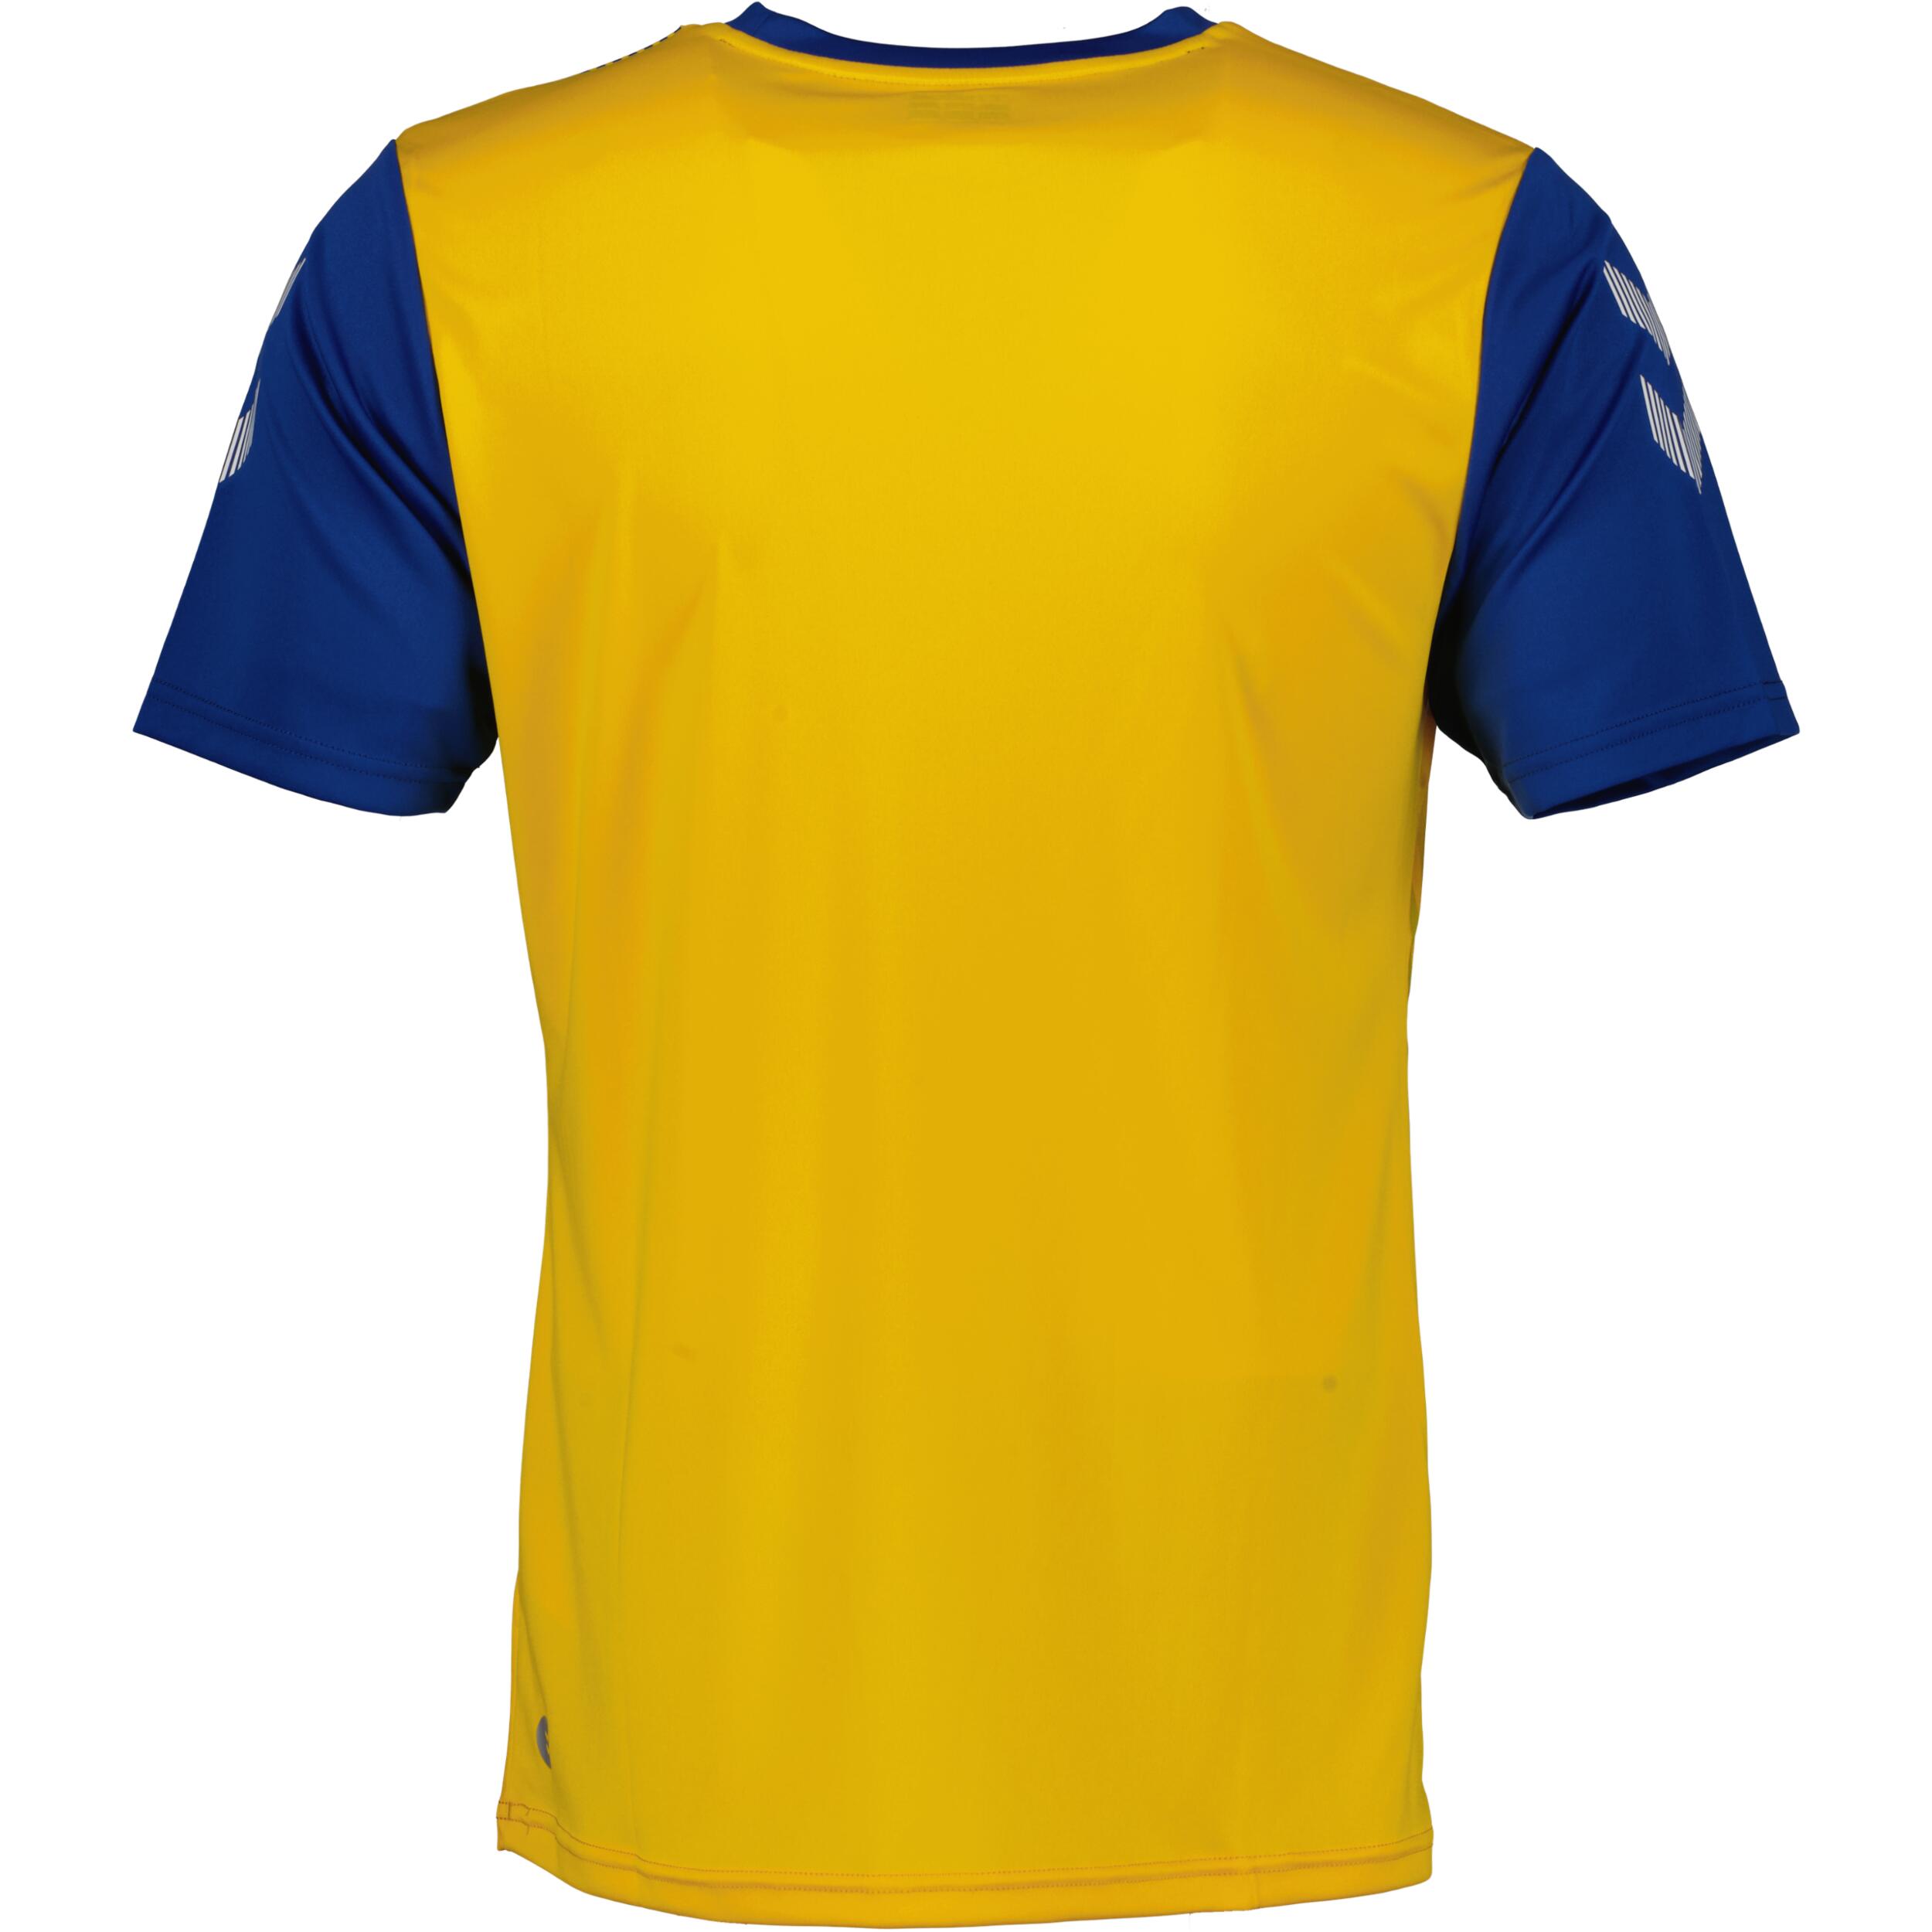 Mexico jersey for men, great for football, in true blue/sports yellow 2/3